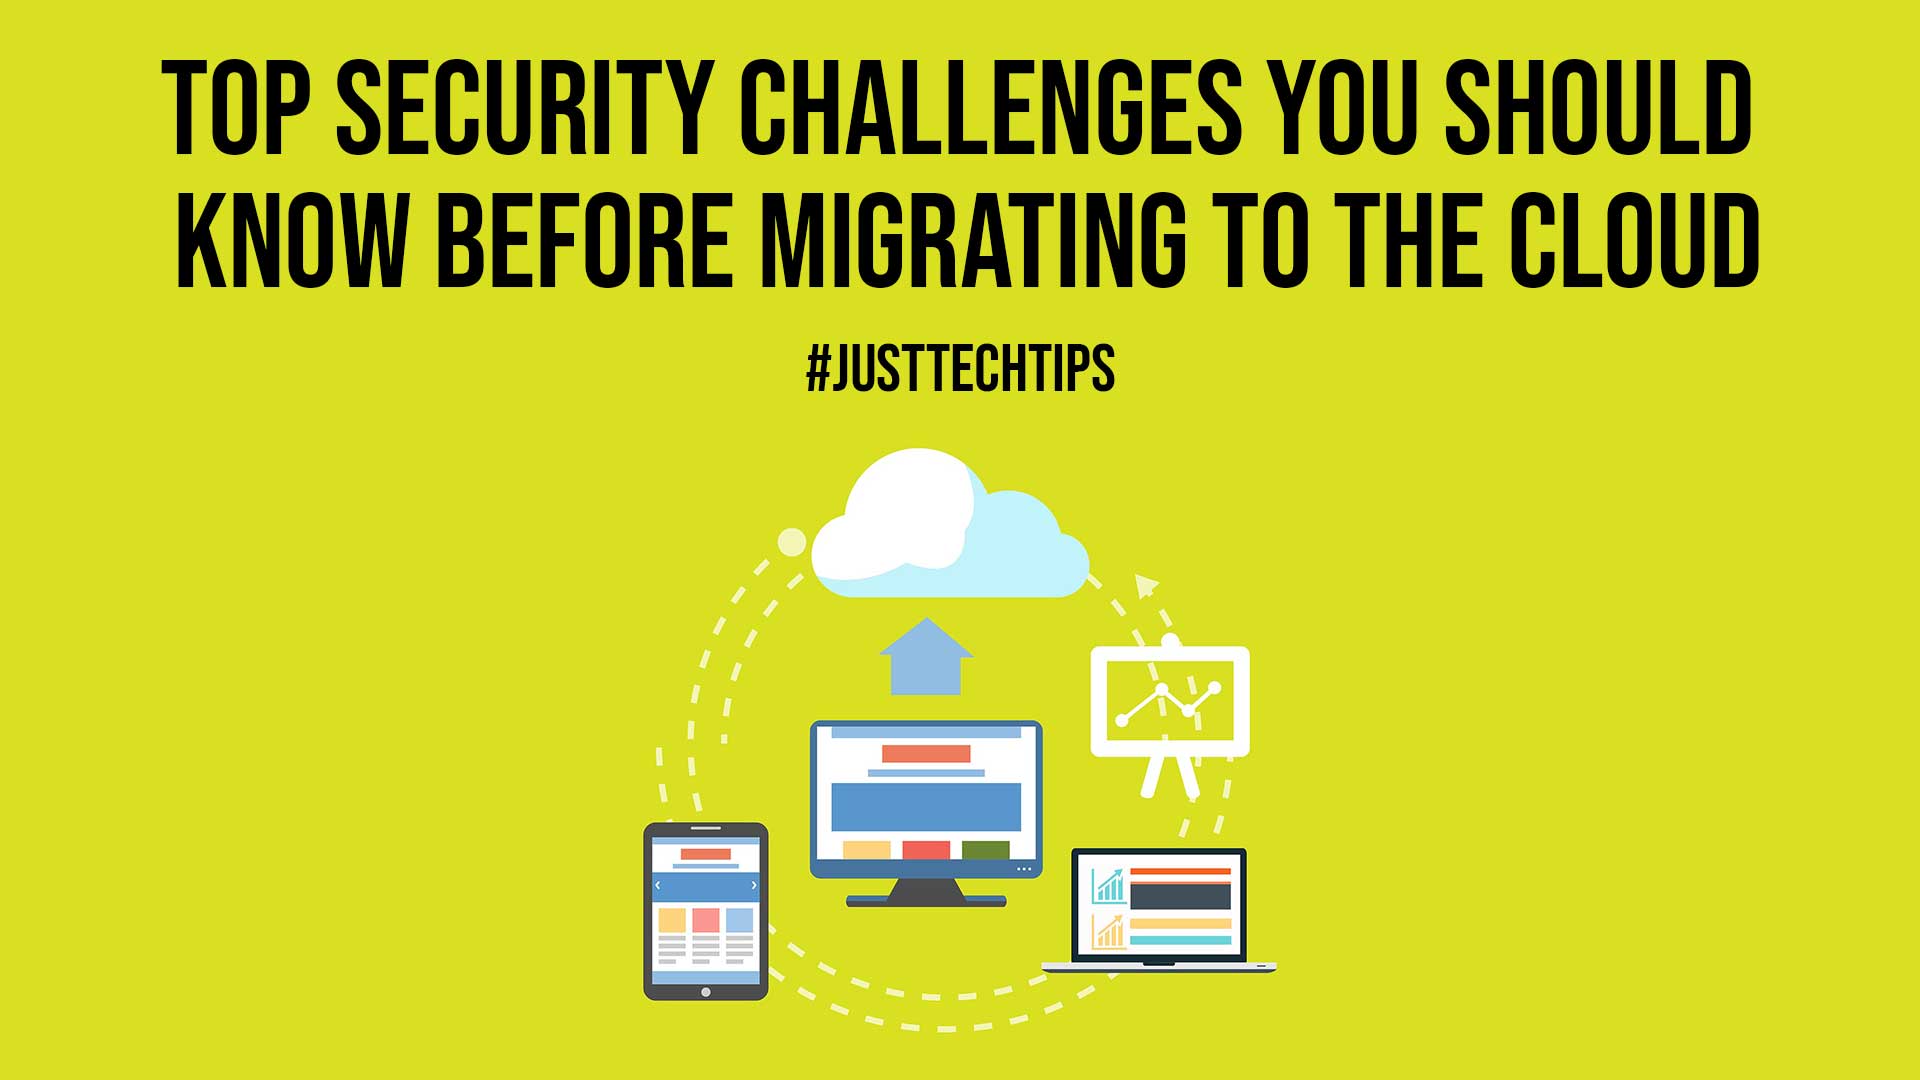 Top Security Challenges You Should Know Before Migrating to the Cloud